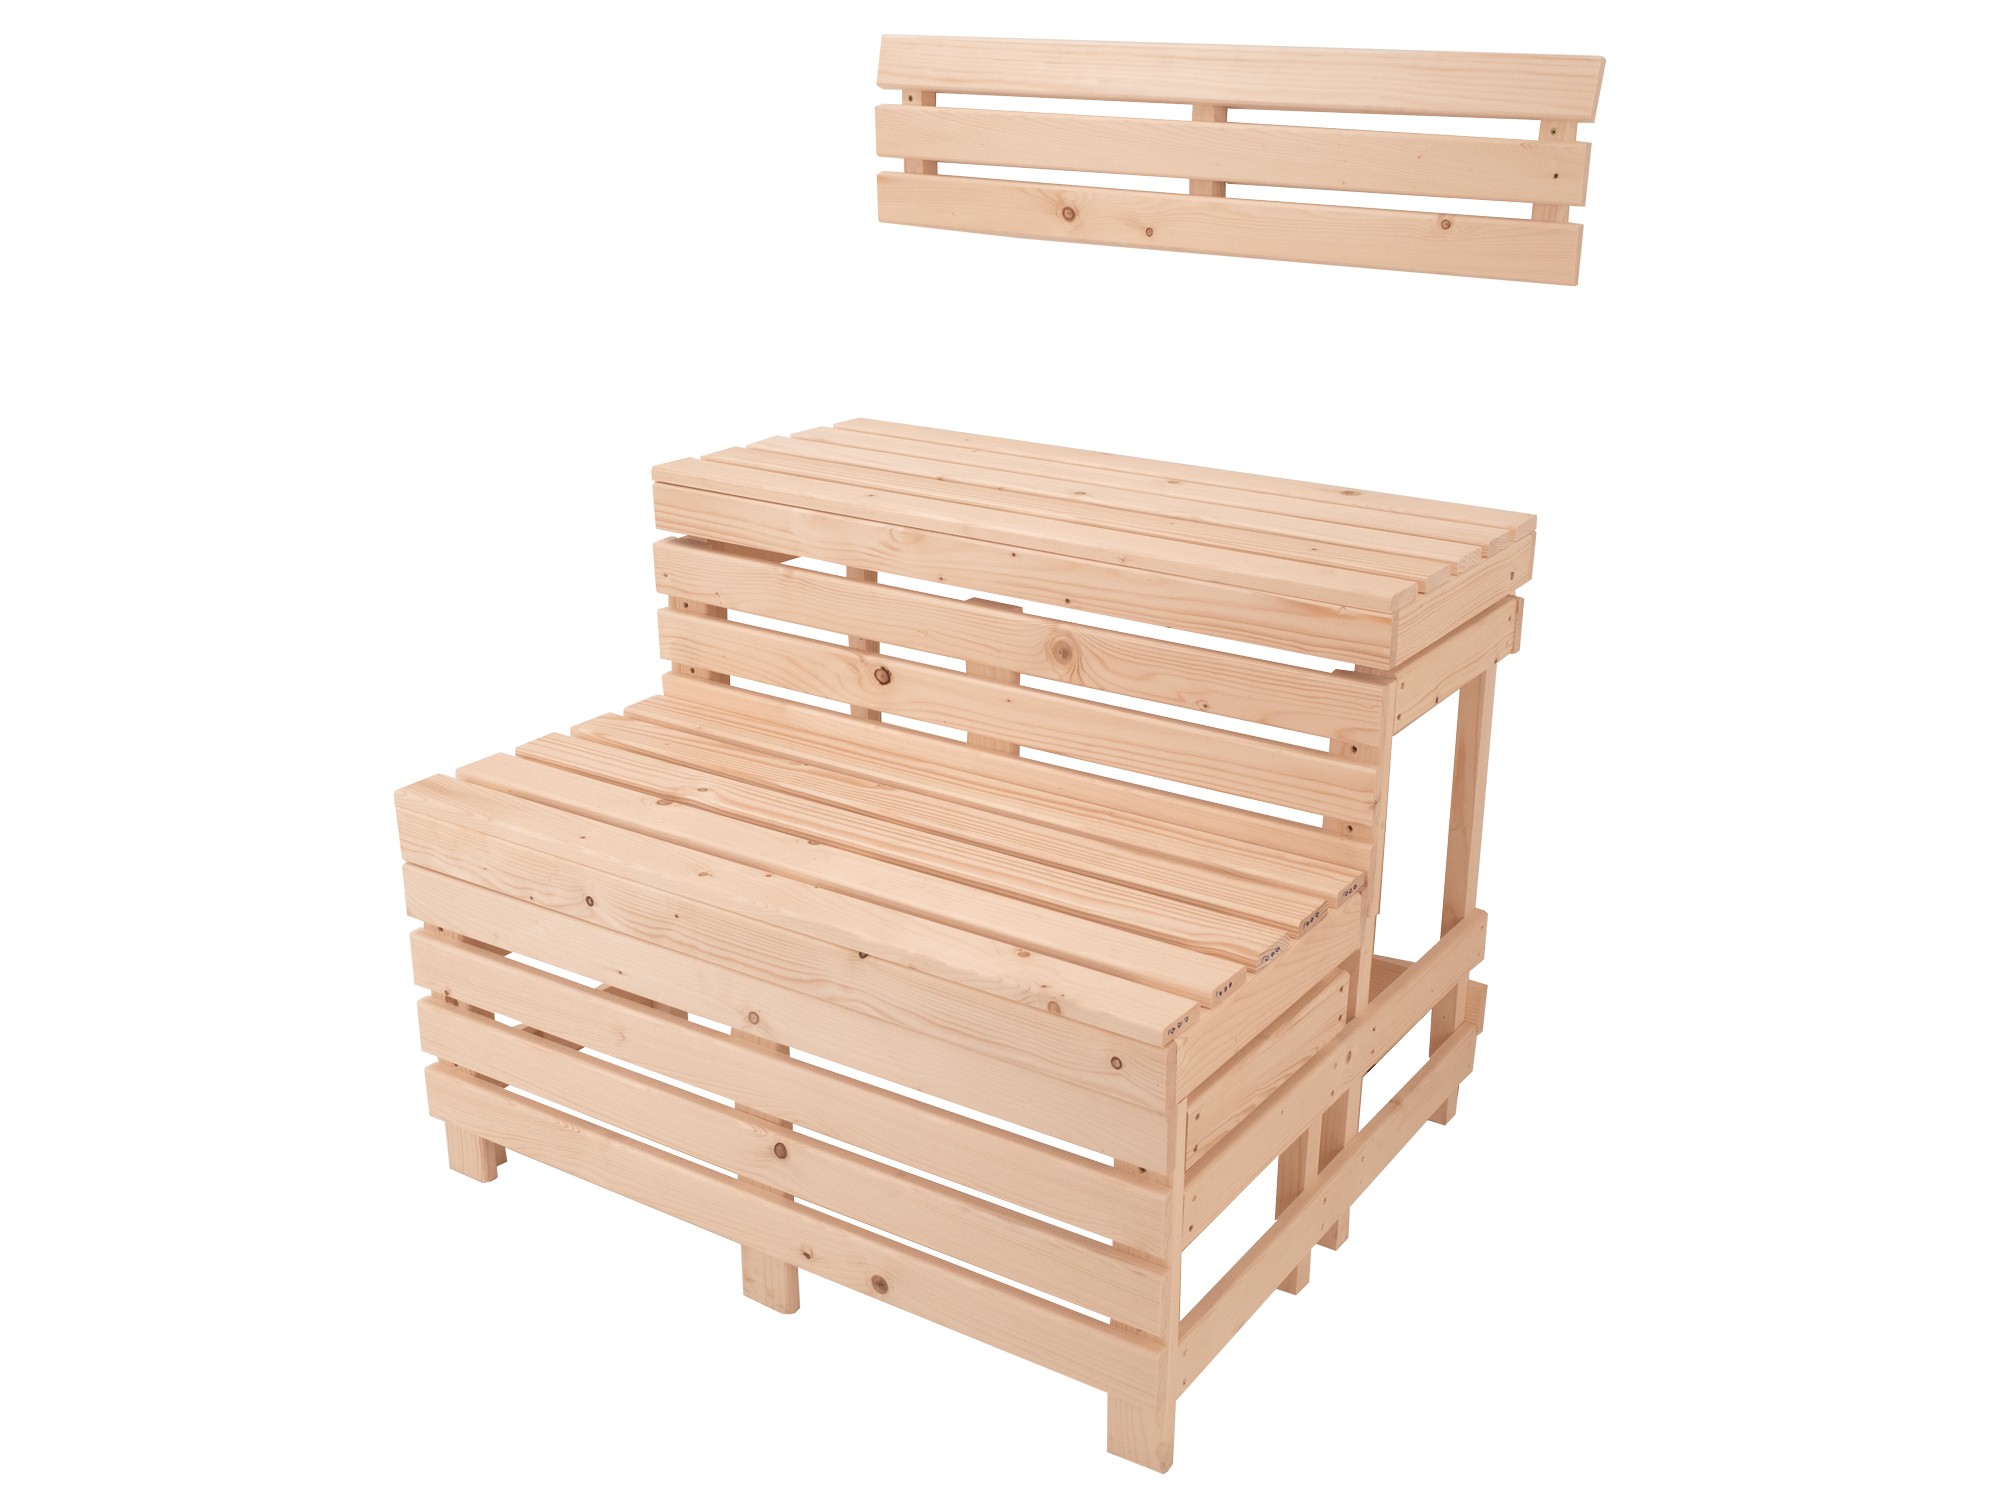 Modular Bench Kit - Double Height - For Traditional Sauna Cabins 